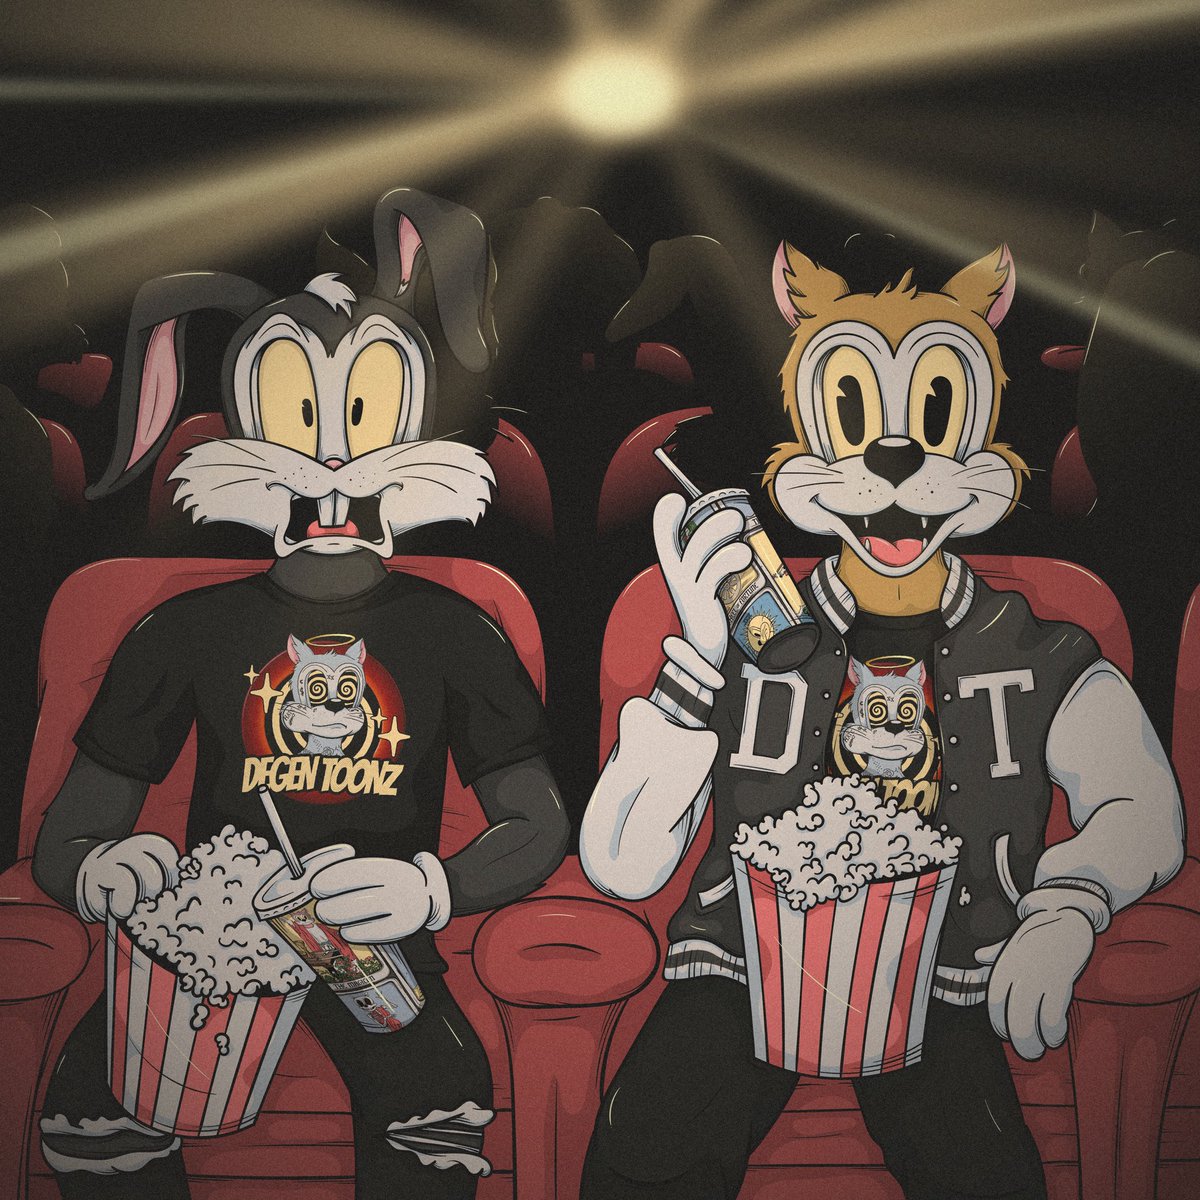 The new film @tarotmovie from @sonypictures hits theaters TONIGHT! 🎥🃏

Share your theater selfie with us using #TOONZTAROT 🎟️👀 (Bonus points for wearing TOONZ gear!) 

TWO winners will be selected next week to receive an OG TOON! 😼

Cant see the film? Keep reading! 👇